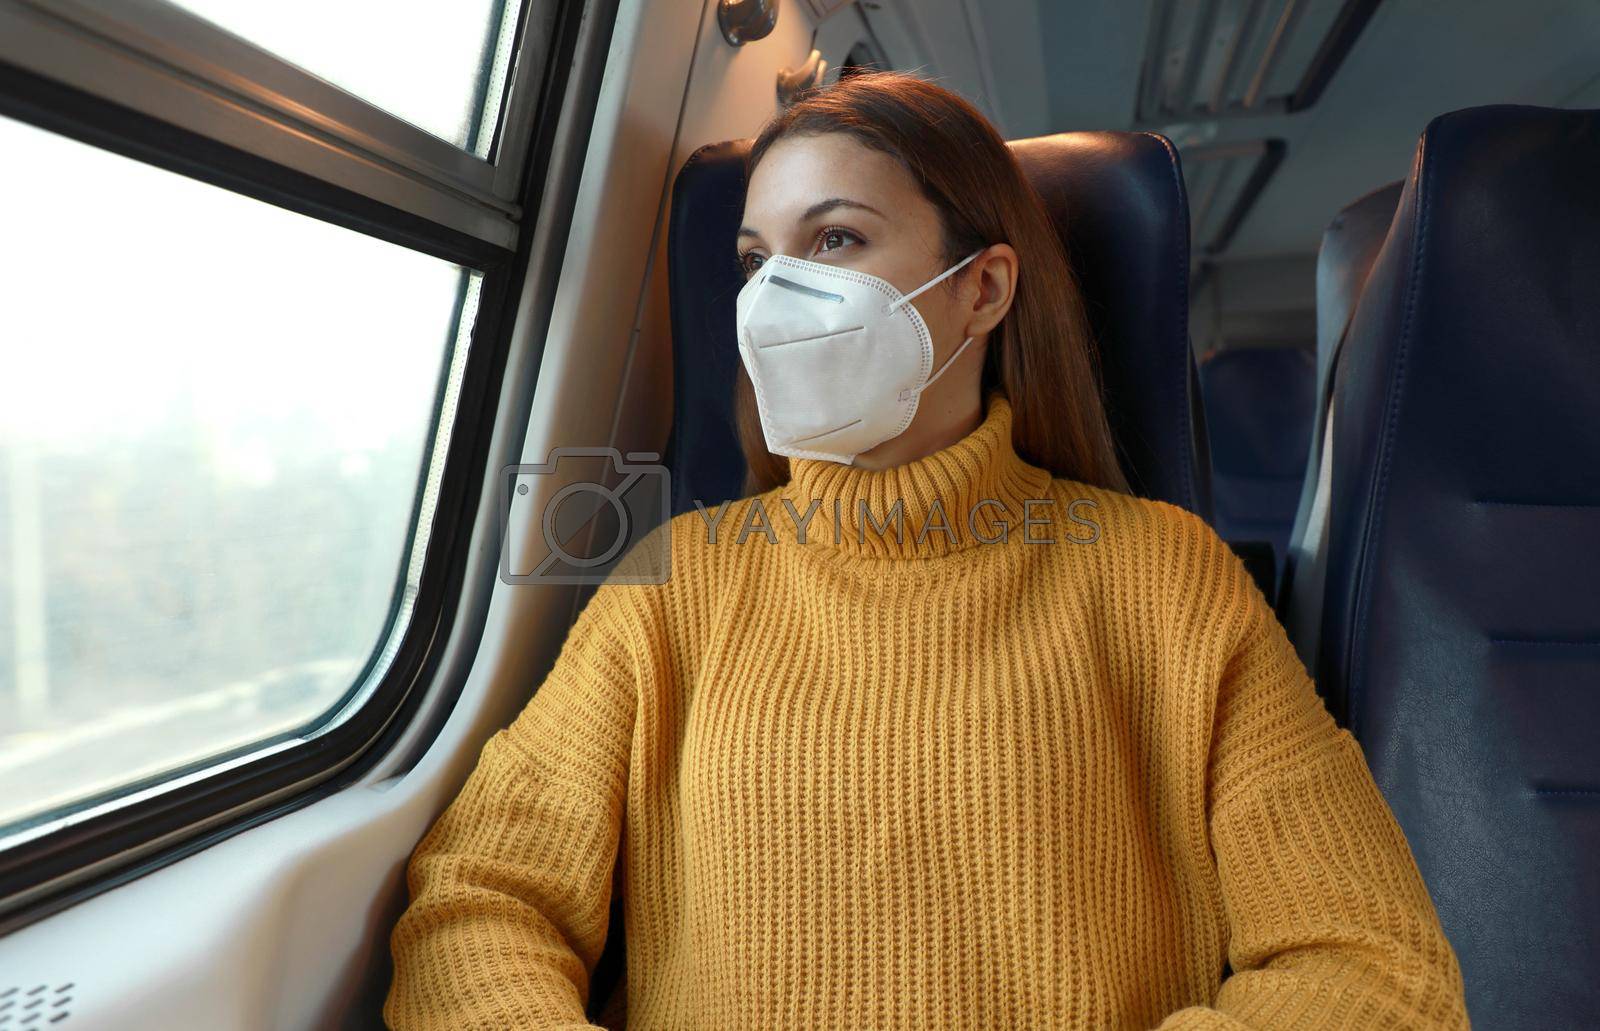 New normal. Passenger in protective mask standing in the train respecting health and safety rules.